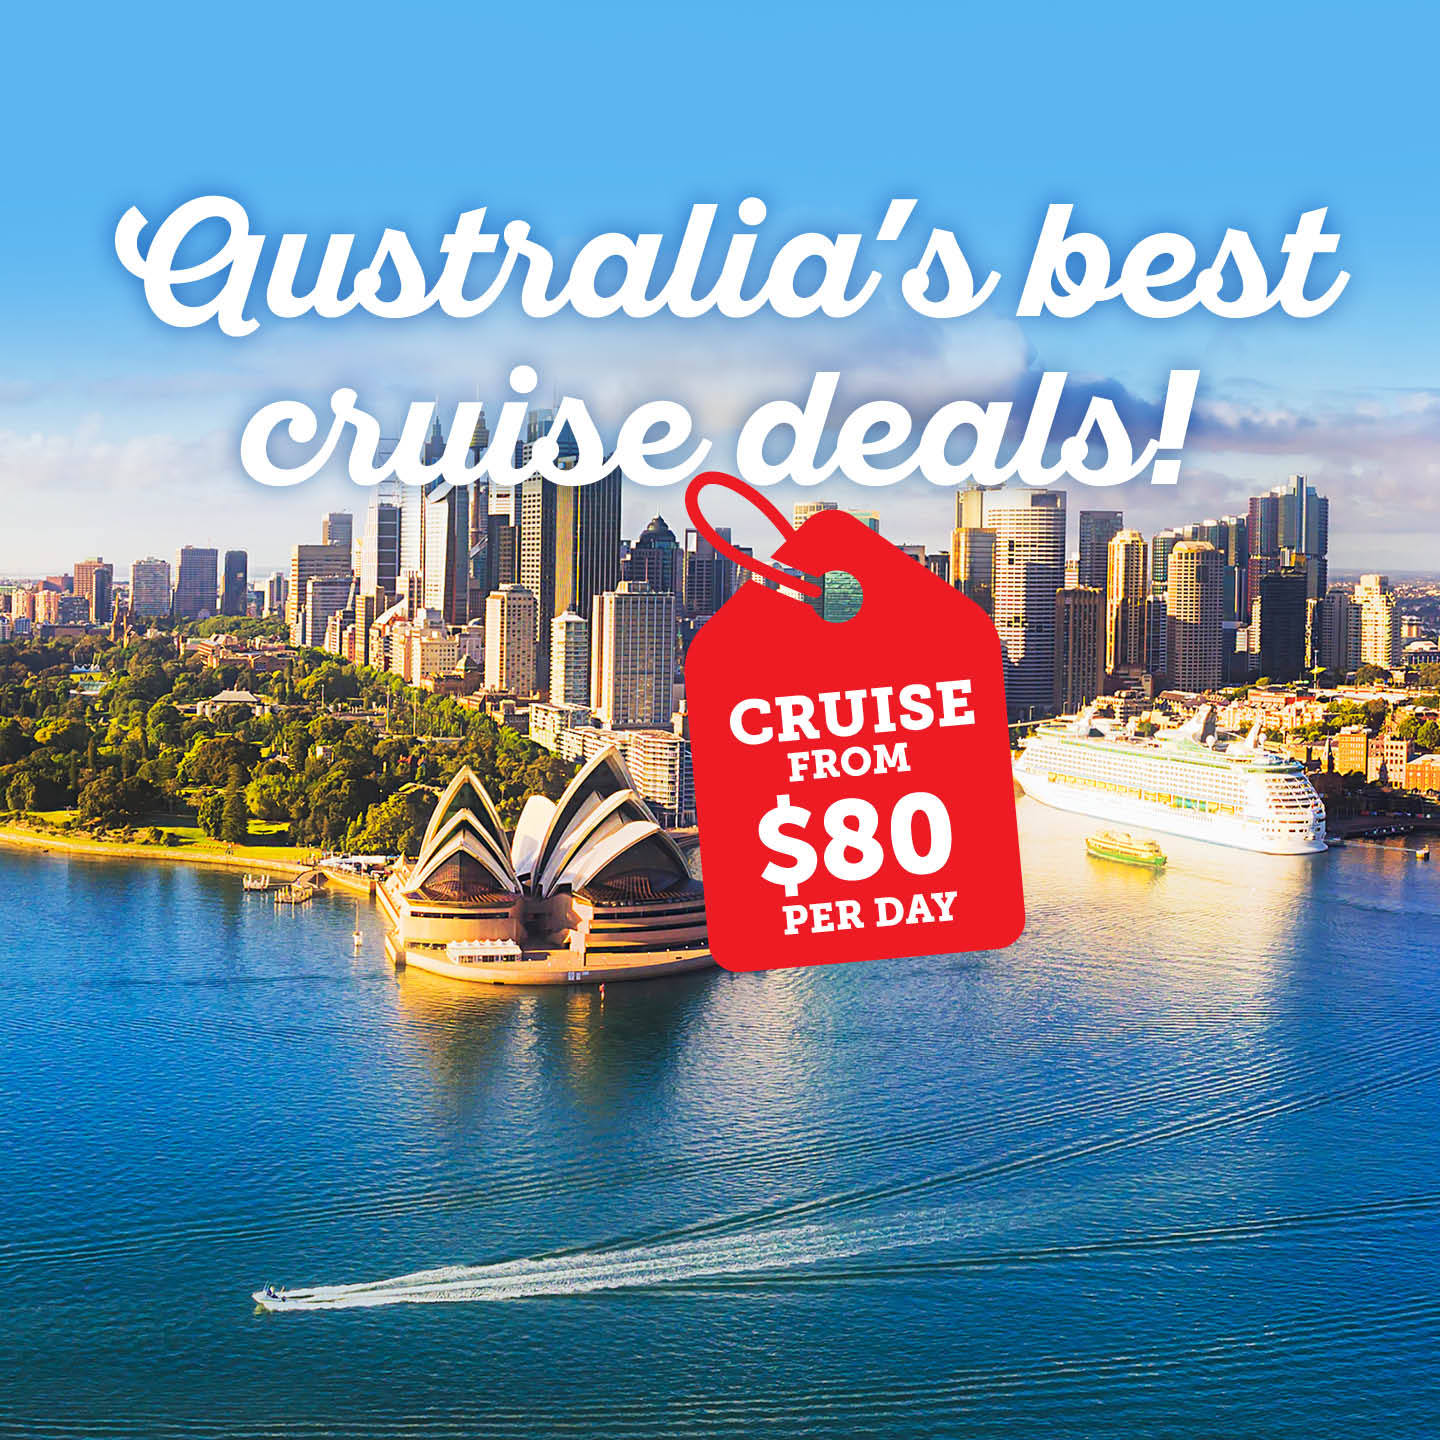 CRUISE OFFERS DEALS